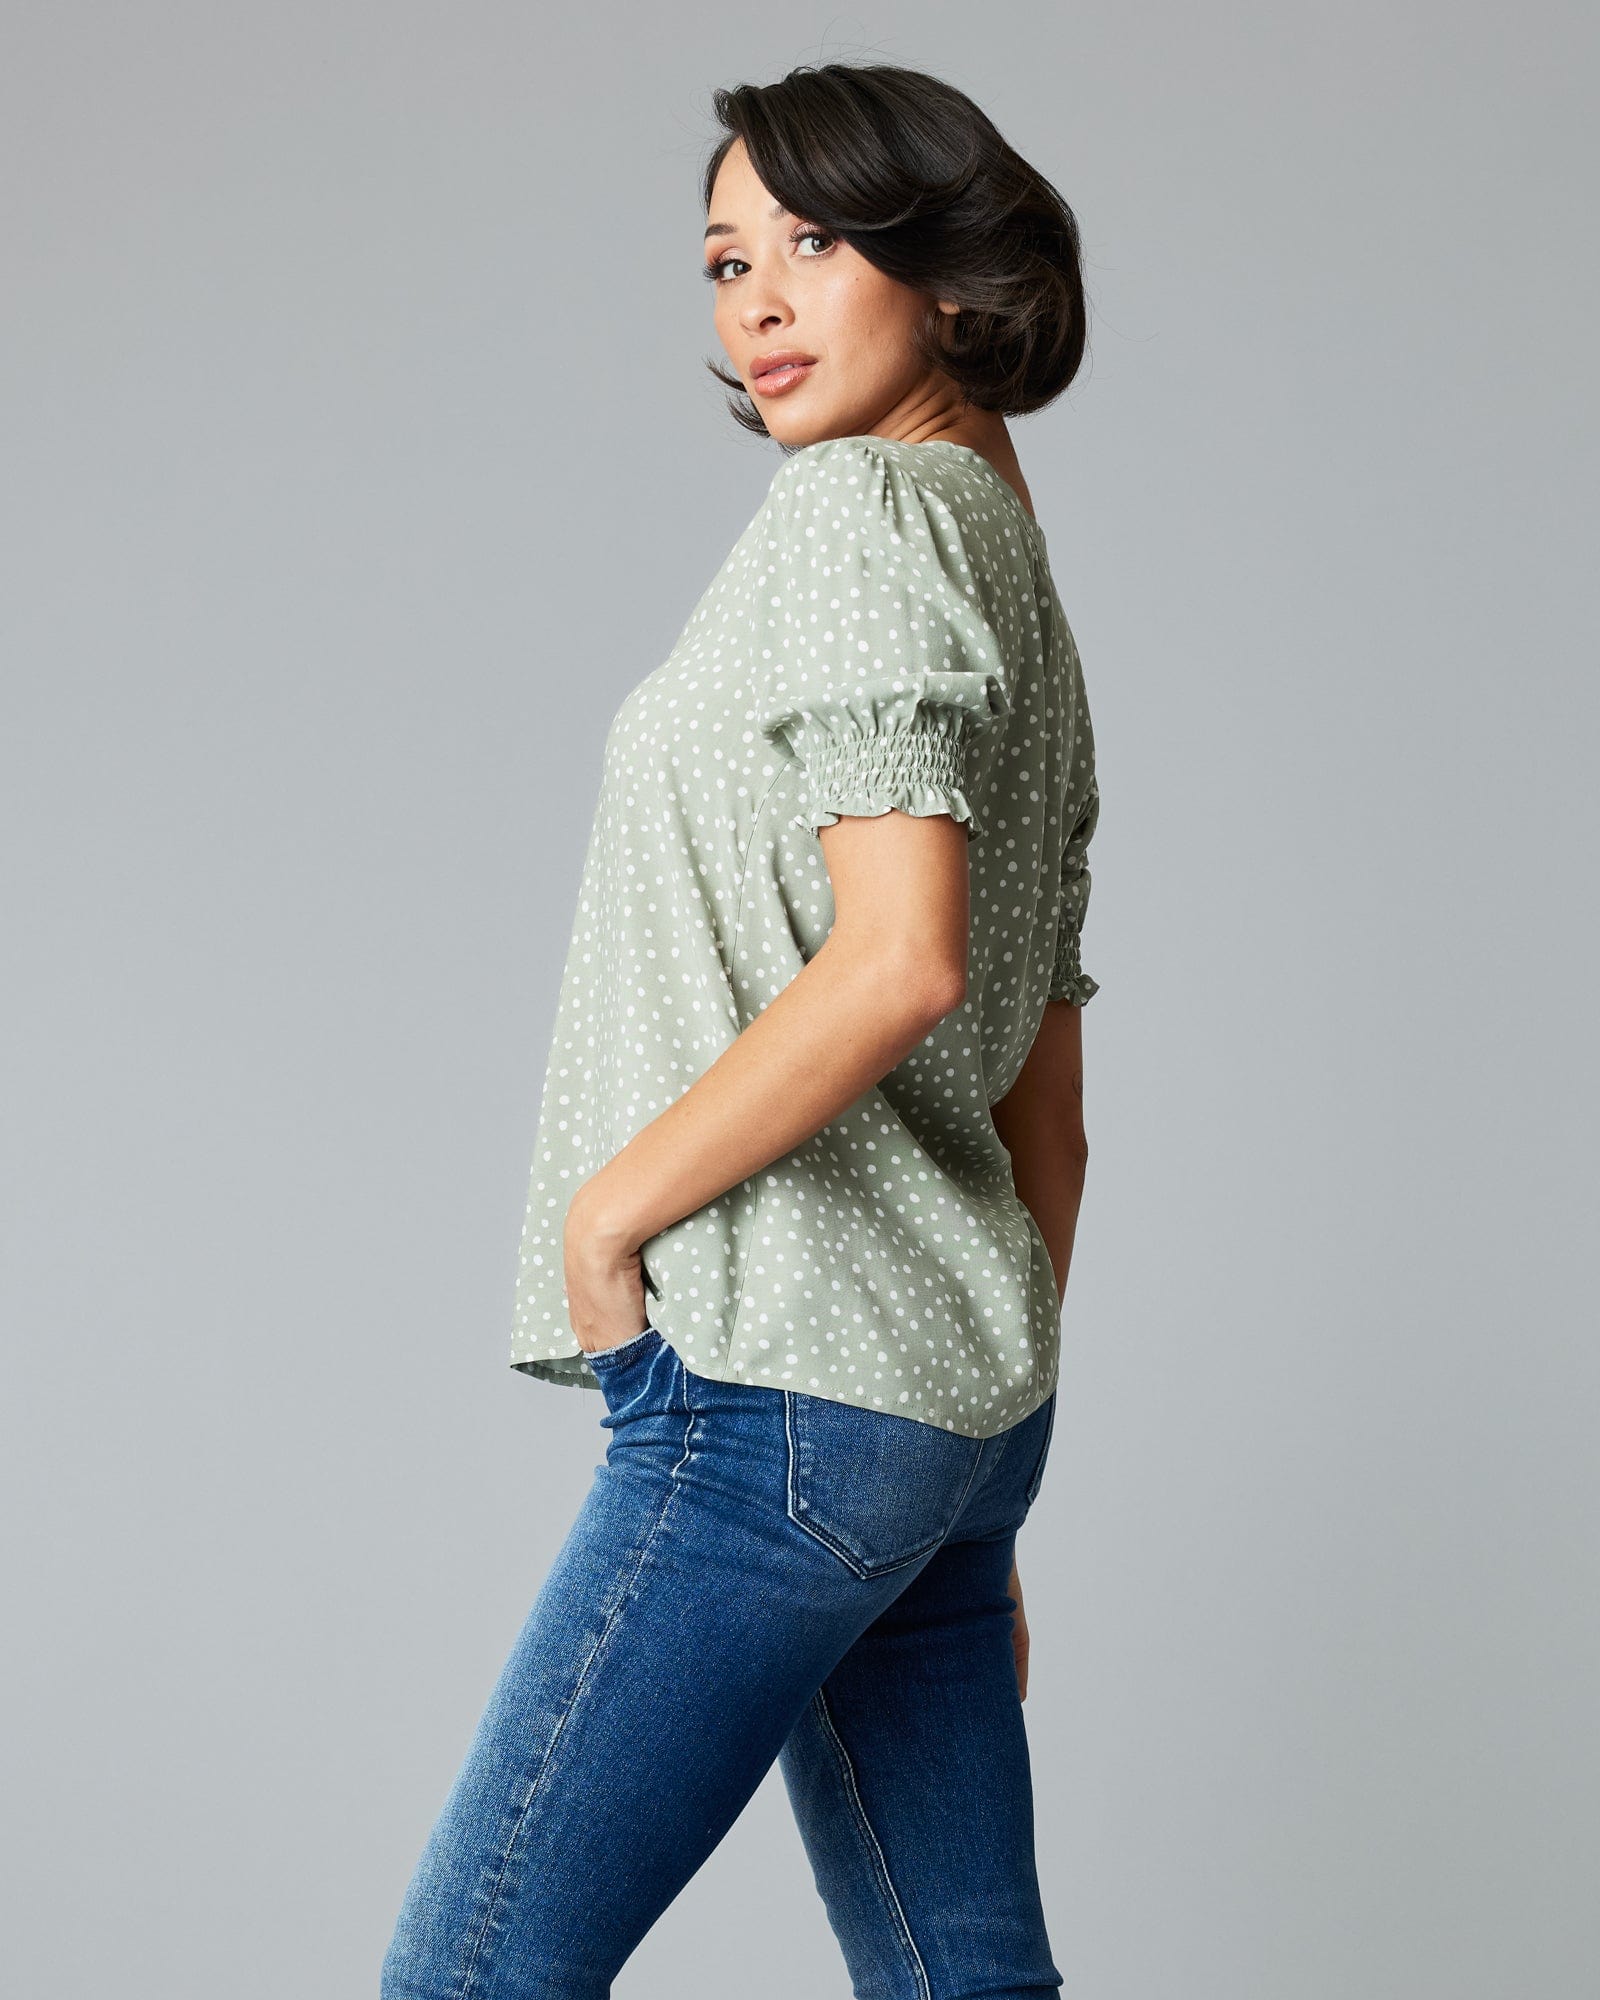 Woman in a short sleeve, green, polka dotted blouse.